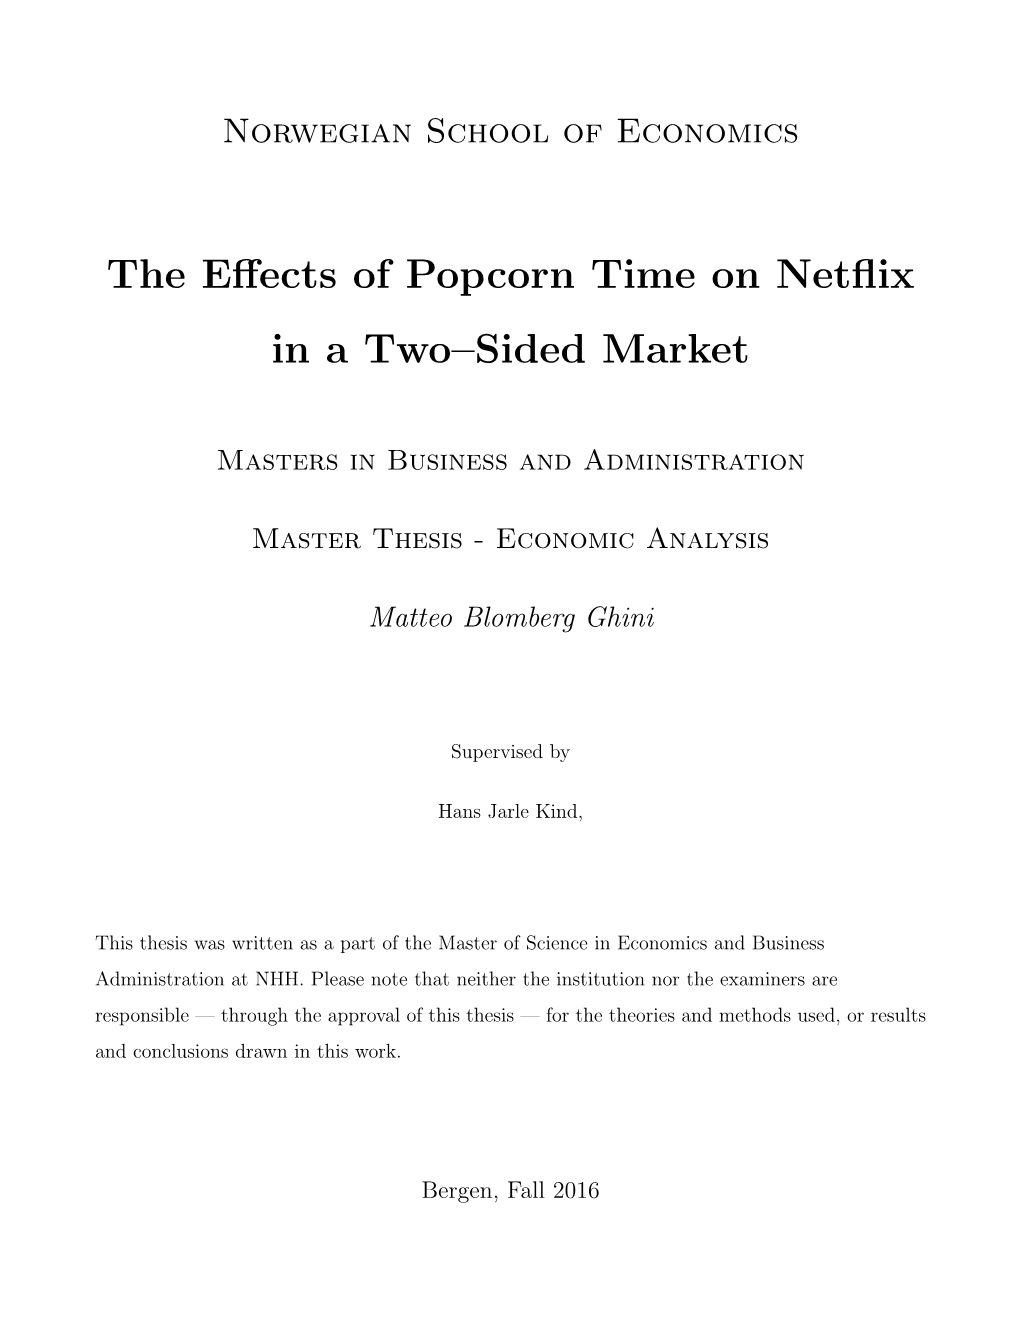 The Effects of Popcorn Time on Netflix in a Two–Sided Market